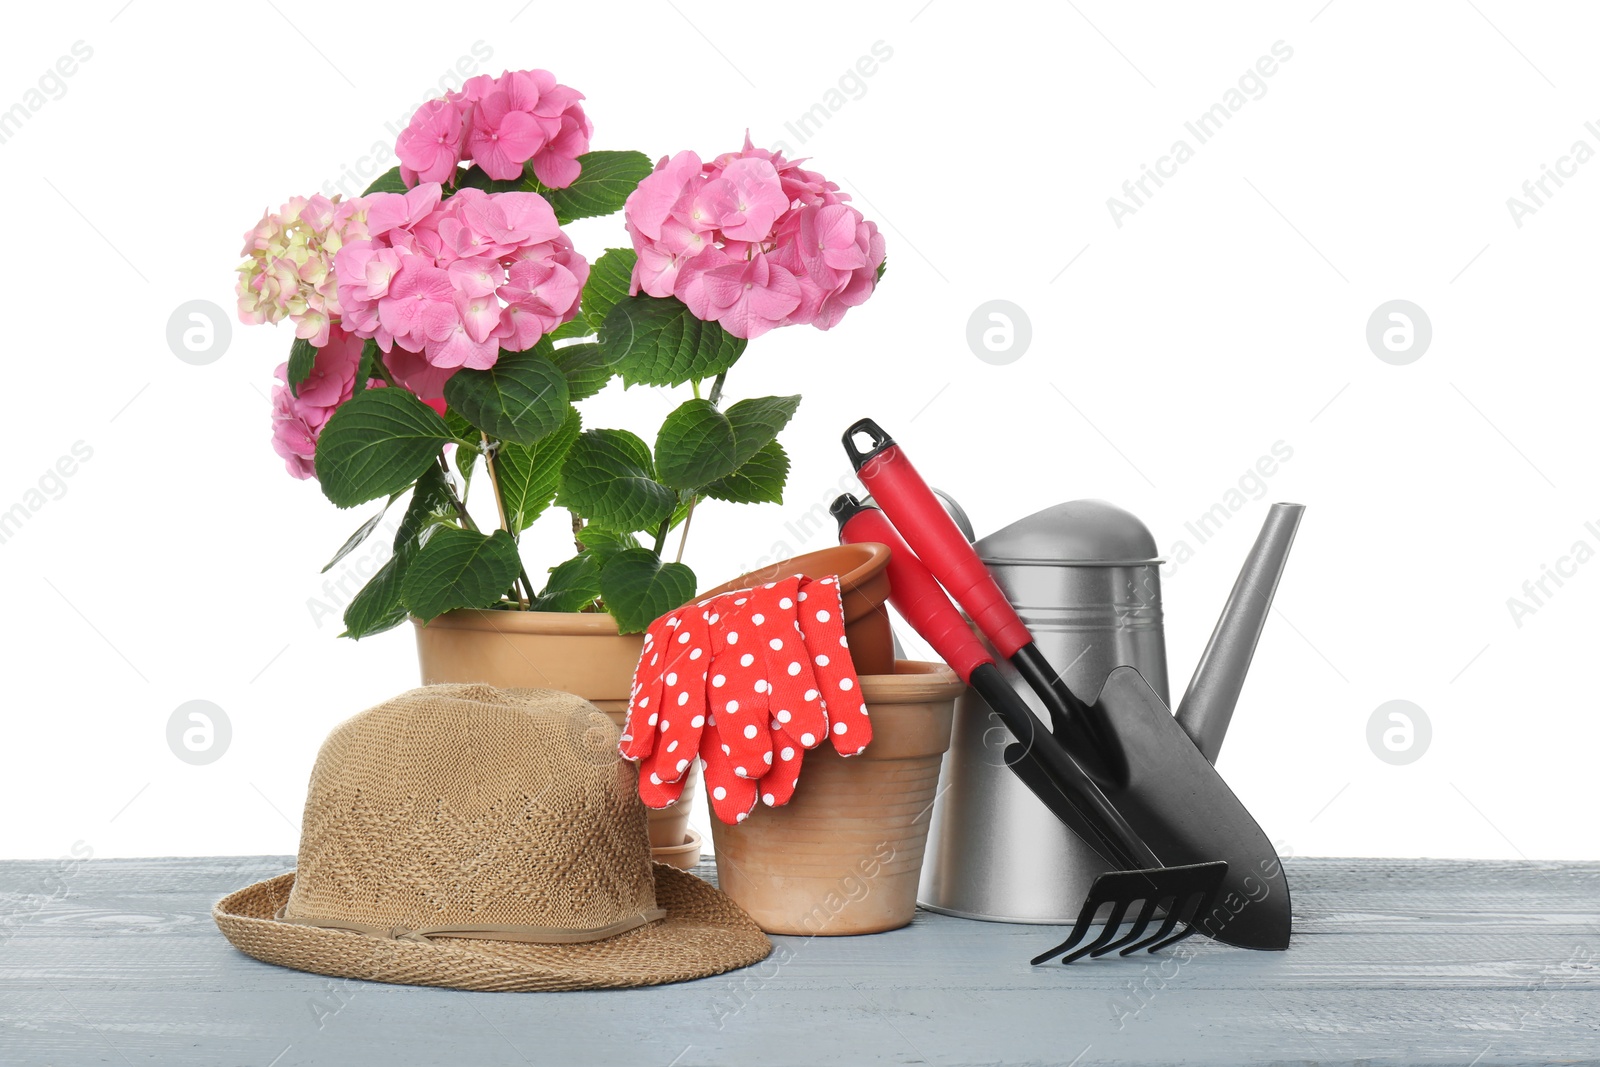 Photo of Beautiful blooming plant, garden tools and accessories on grey wooden table against white background